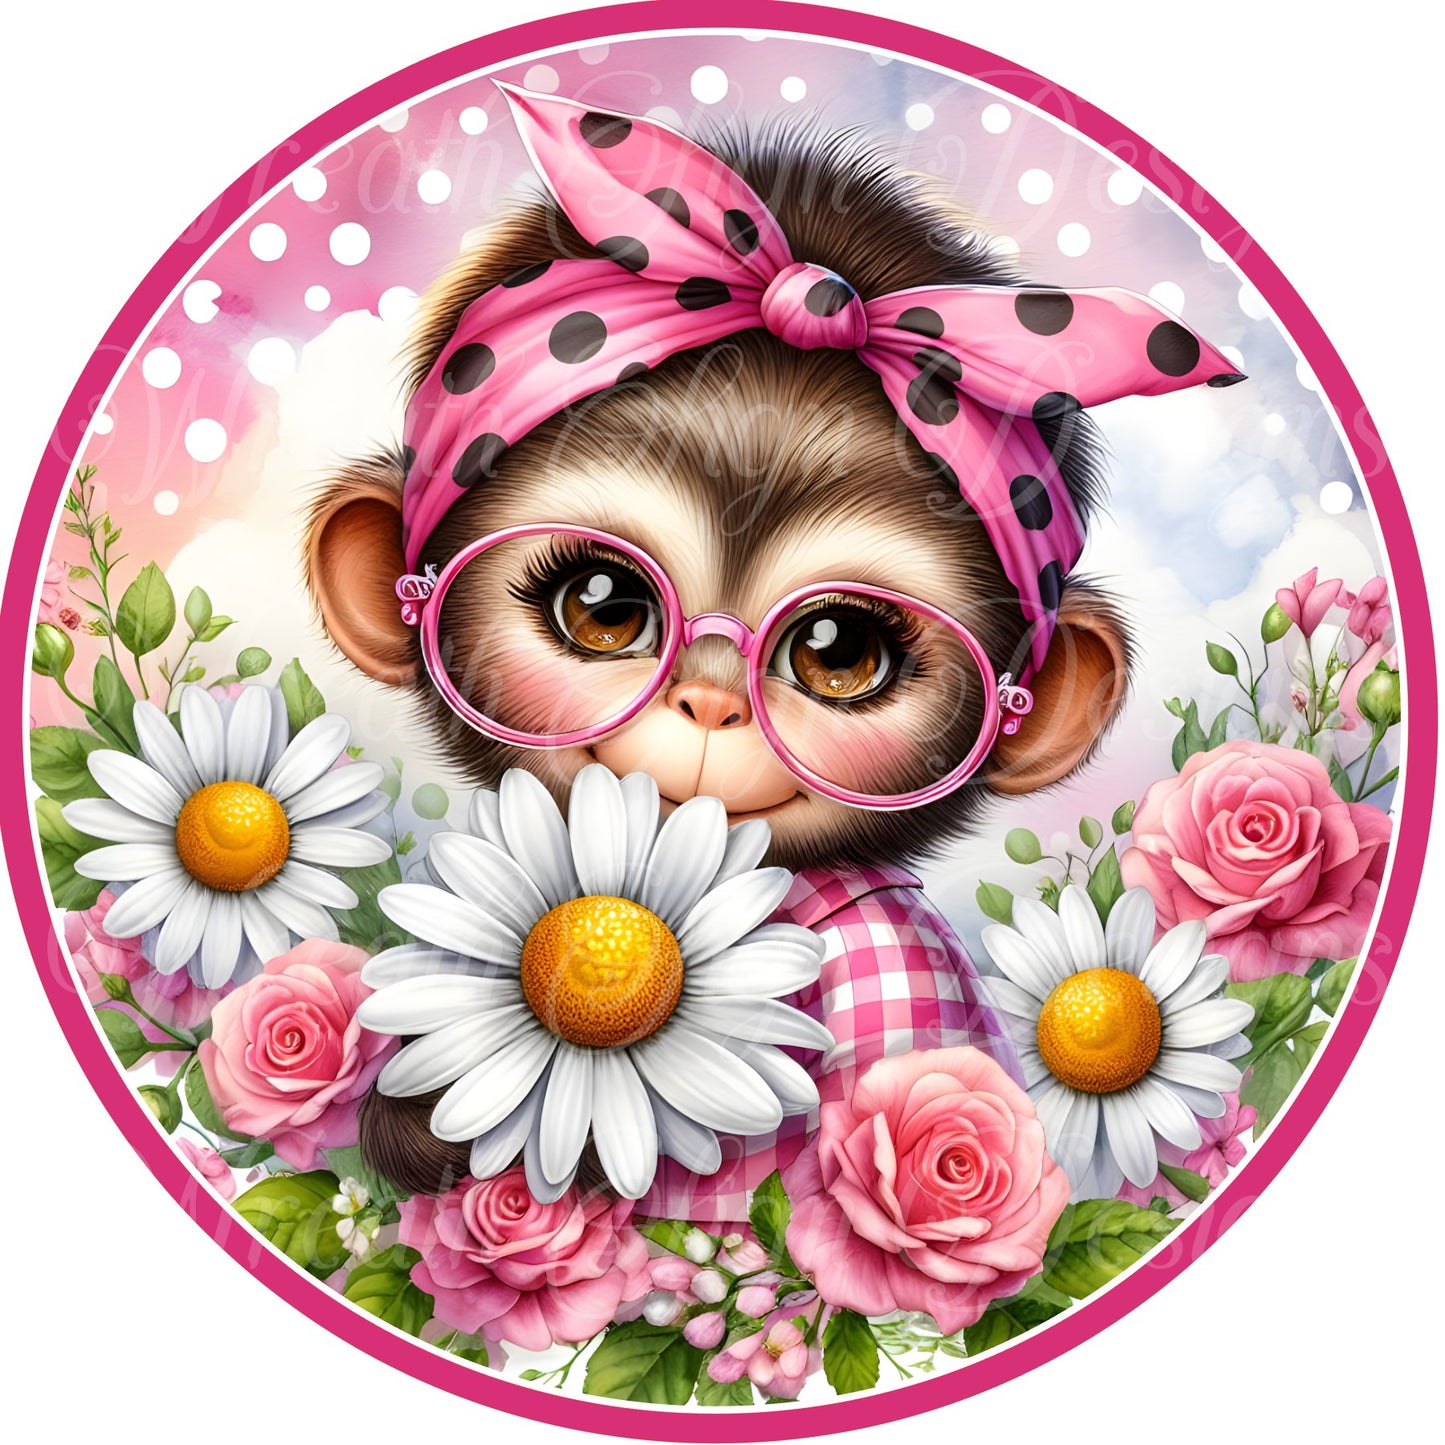 Monkey business, Monkey wearing glasses round metal wreath sign, wreath center, attachment, hot pink springtime sign